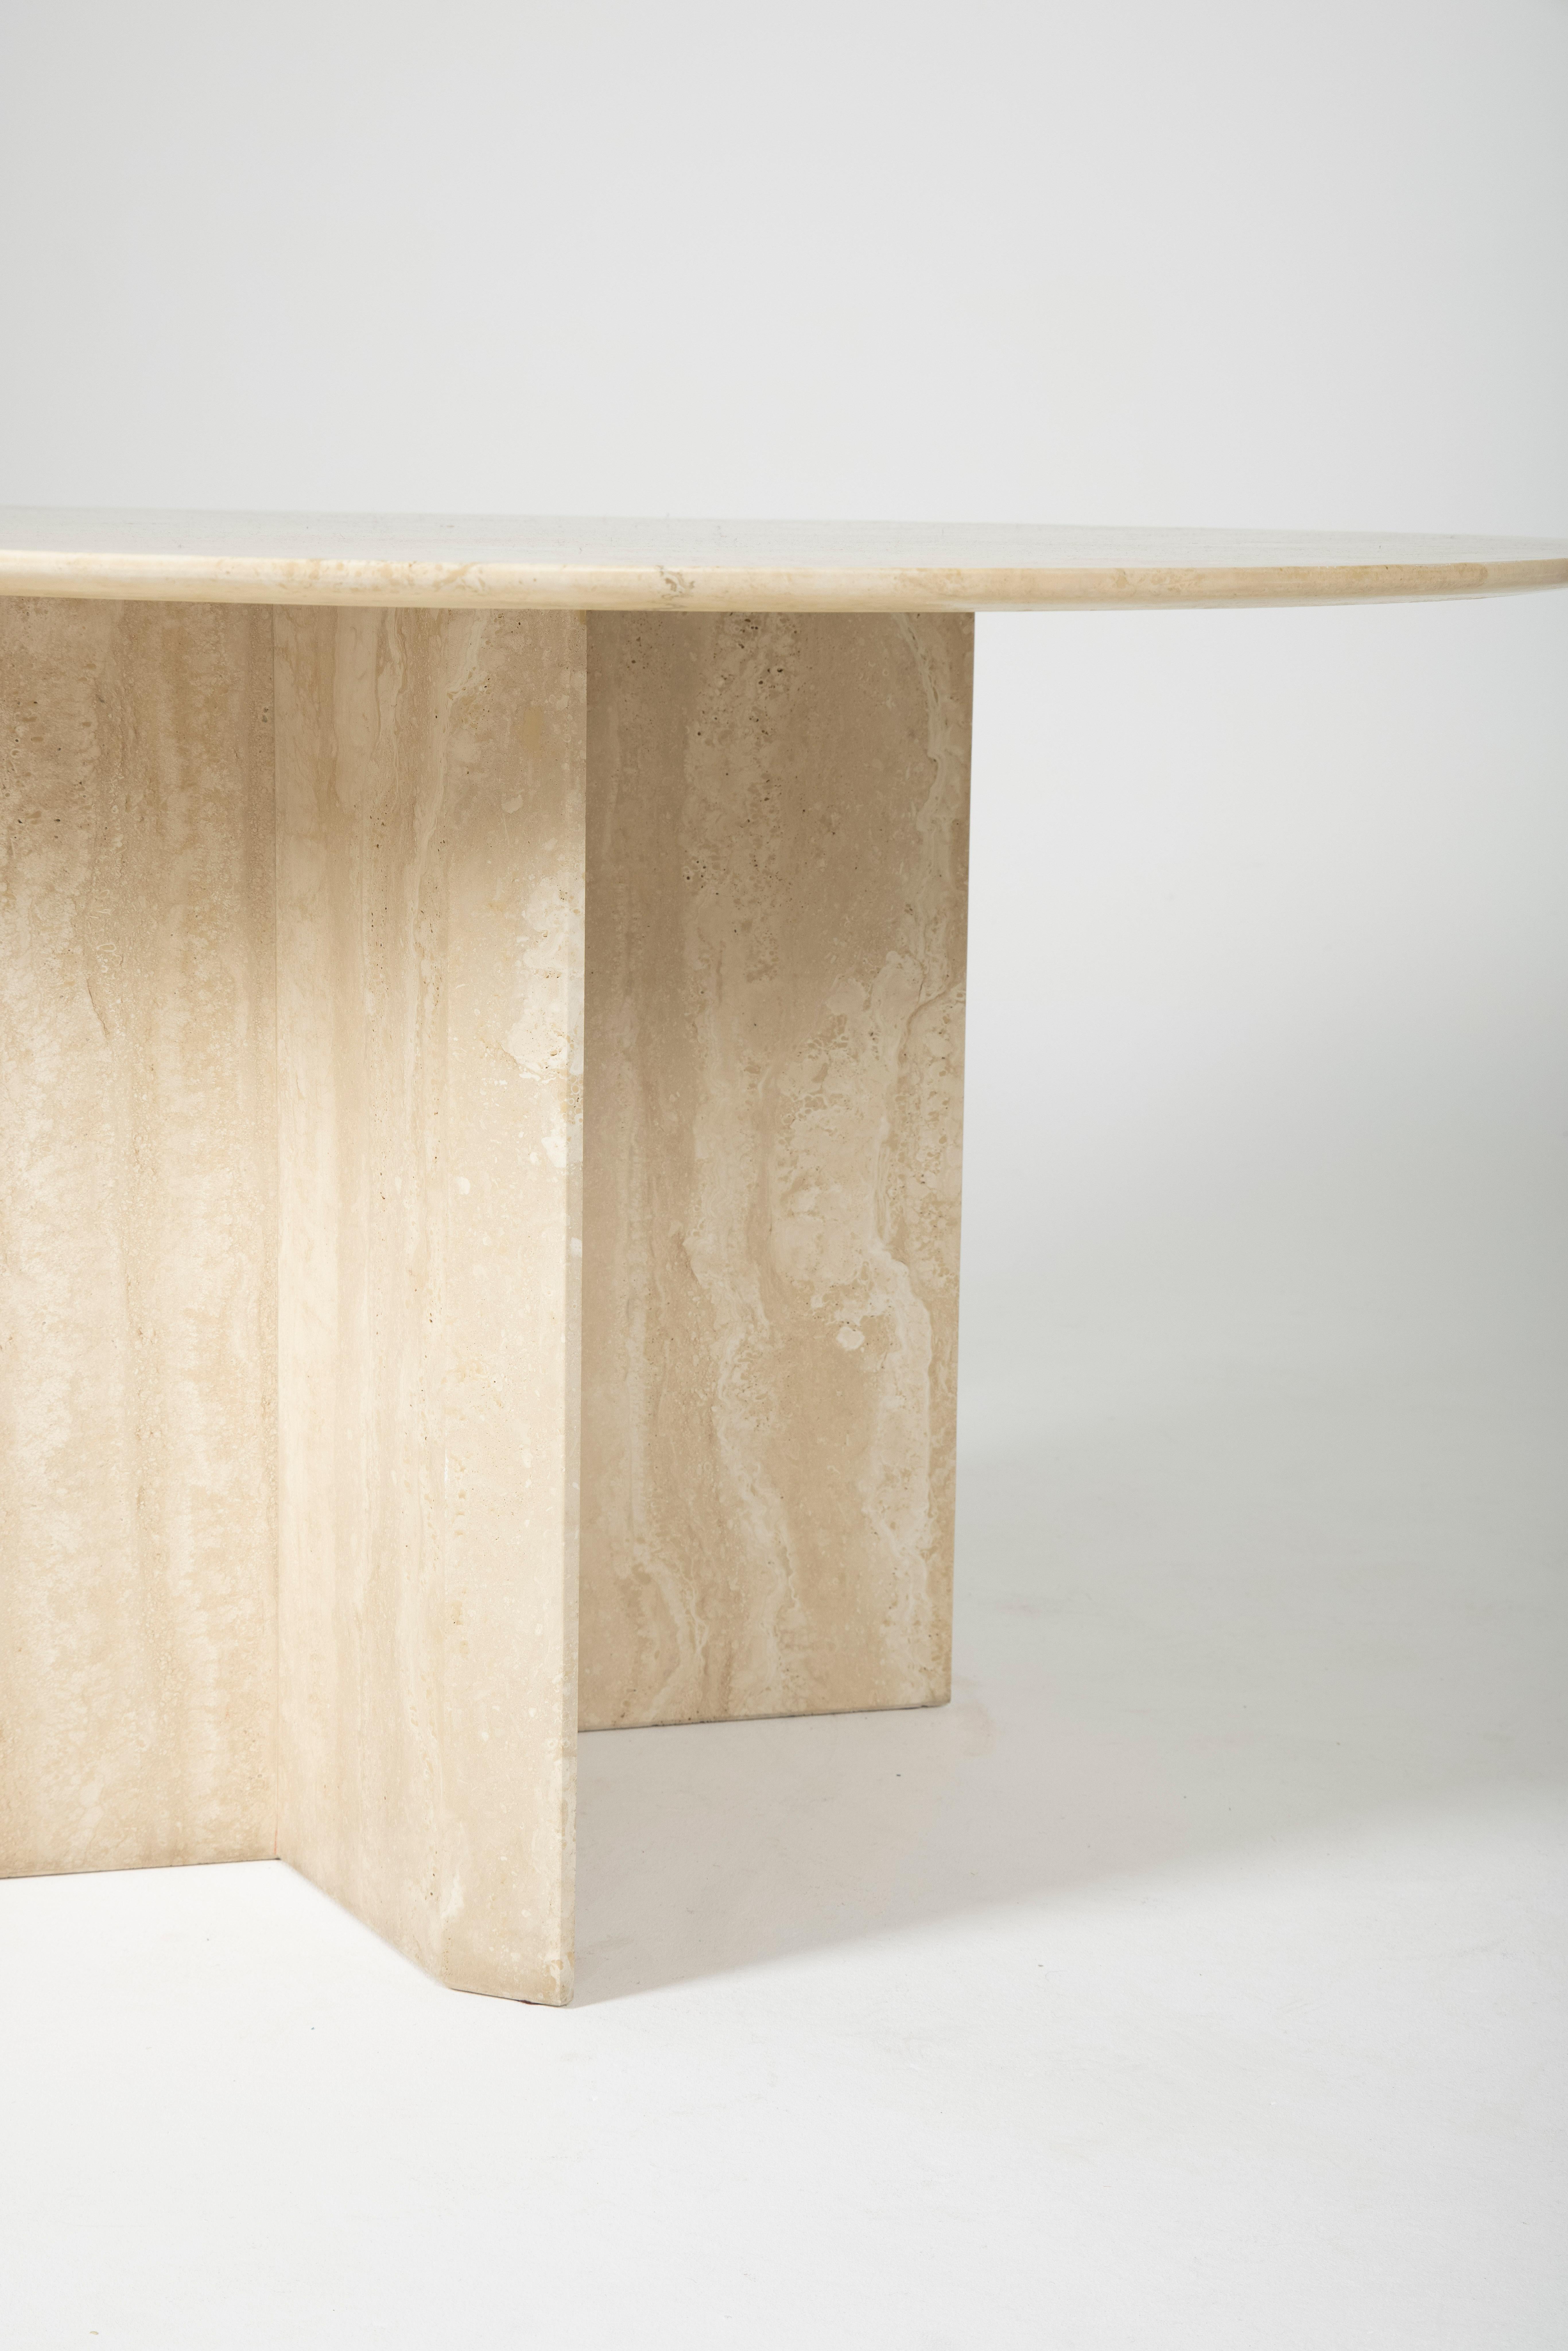 Late 20th Century Round Travertine Dining Table, 1970s